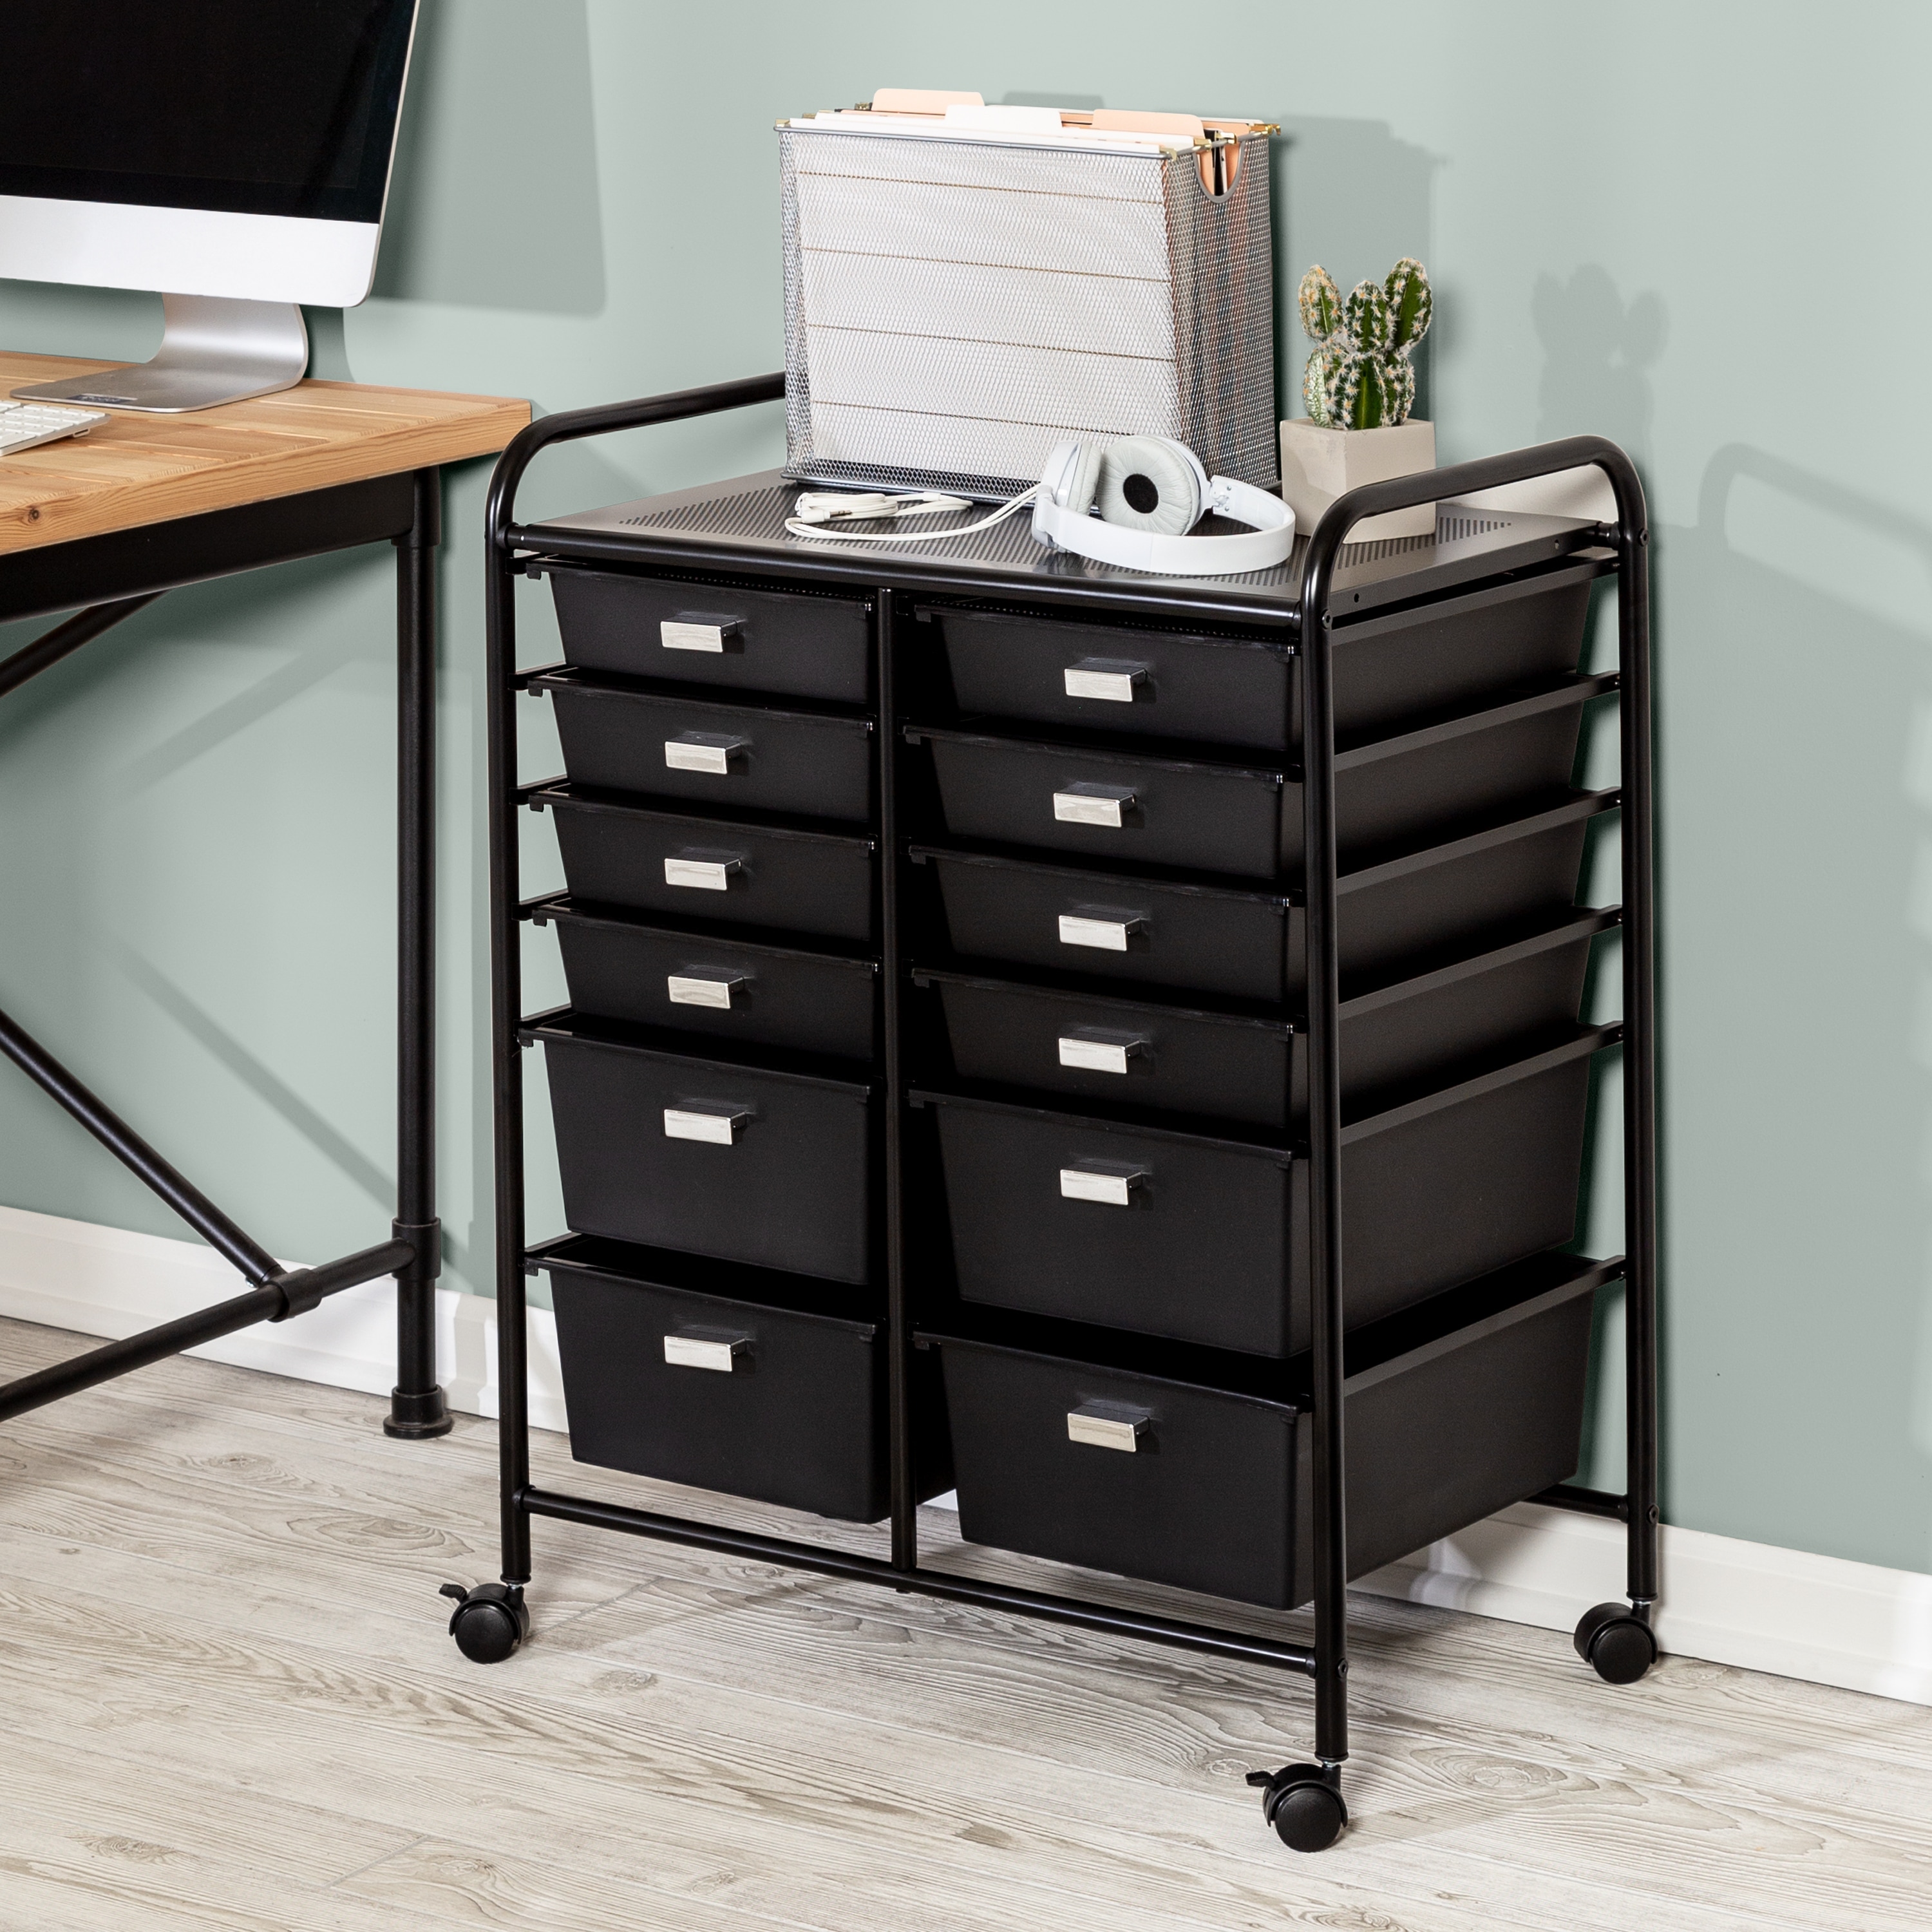 Honey-Can-Do 3-Drawer Woven Home Office Organizer, Black